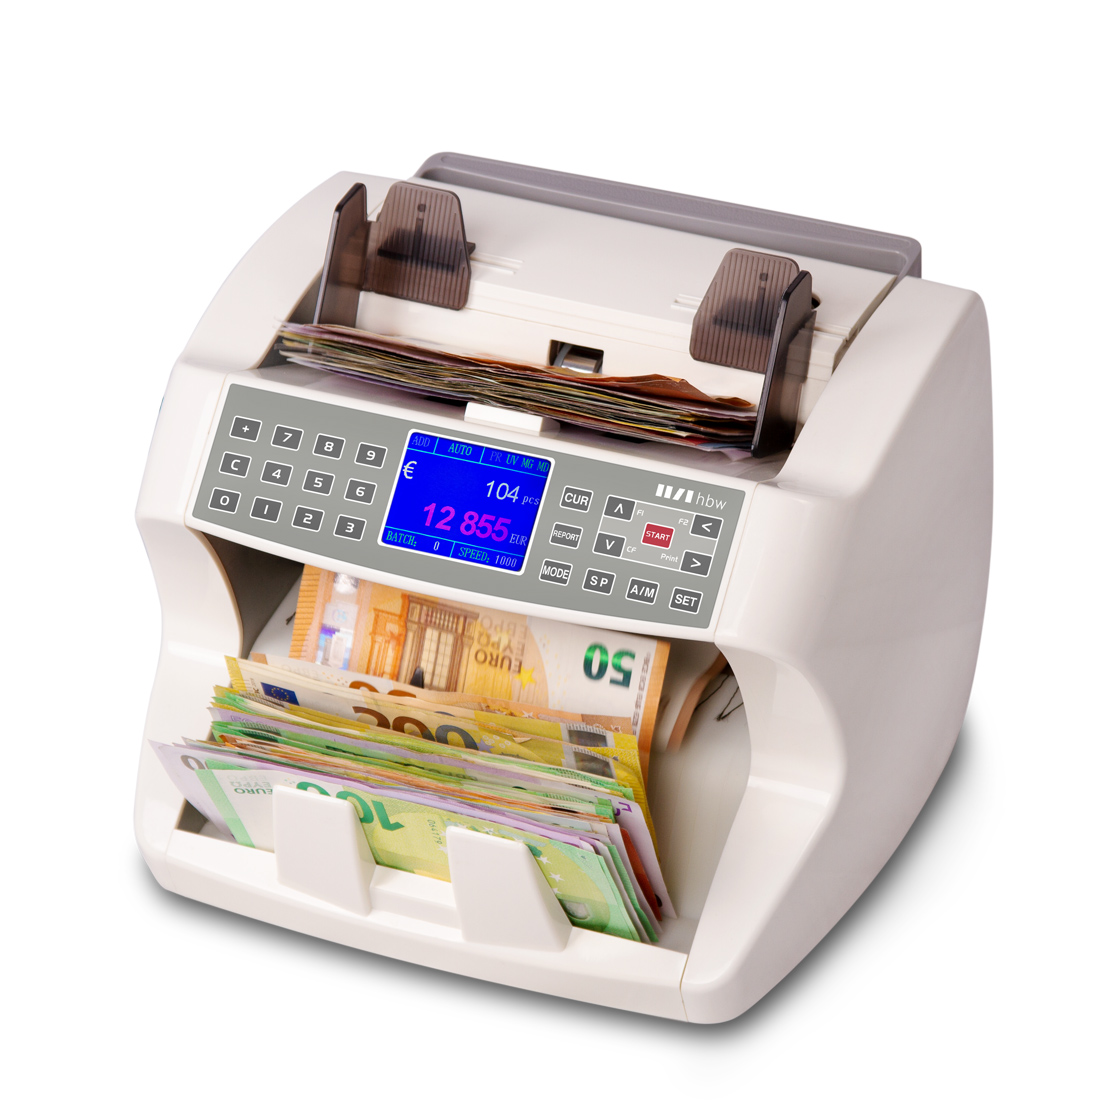 Banknote counters hbw VC 5040 Plus